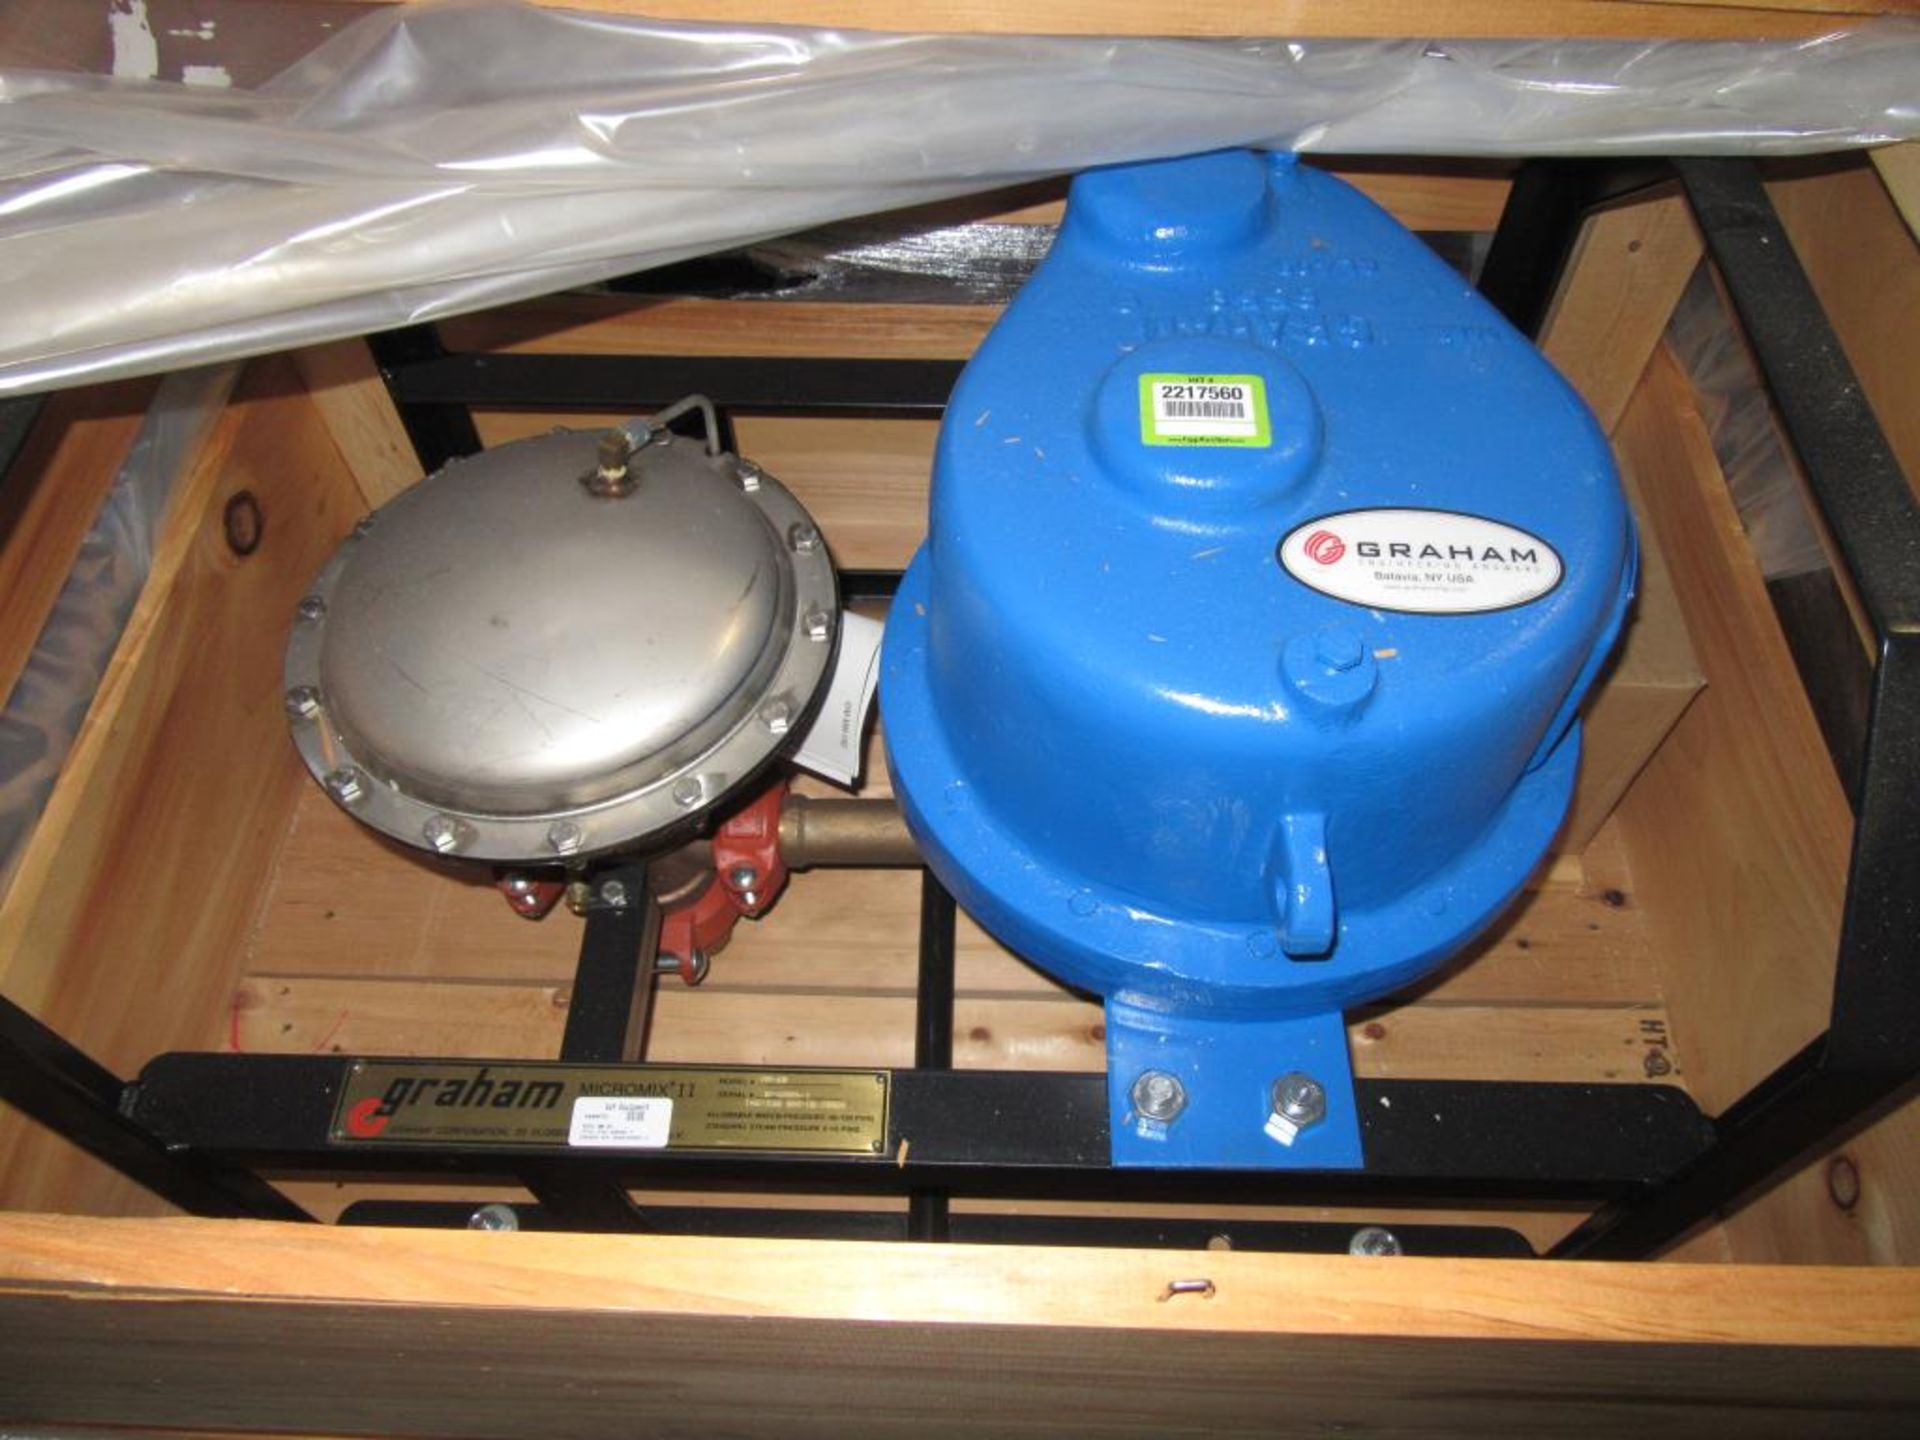 Graham MM-60 Hot Water Heaters; Micro-Mix II Hot Water Heater in Crate. HIT# 2217560. Loc: